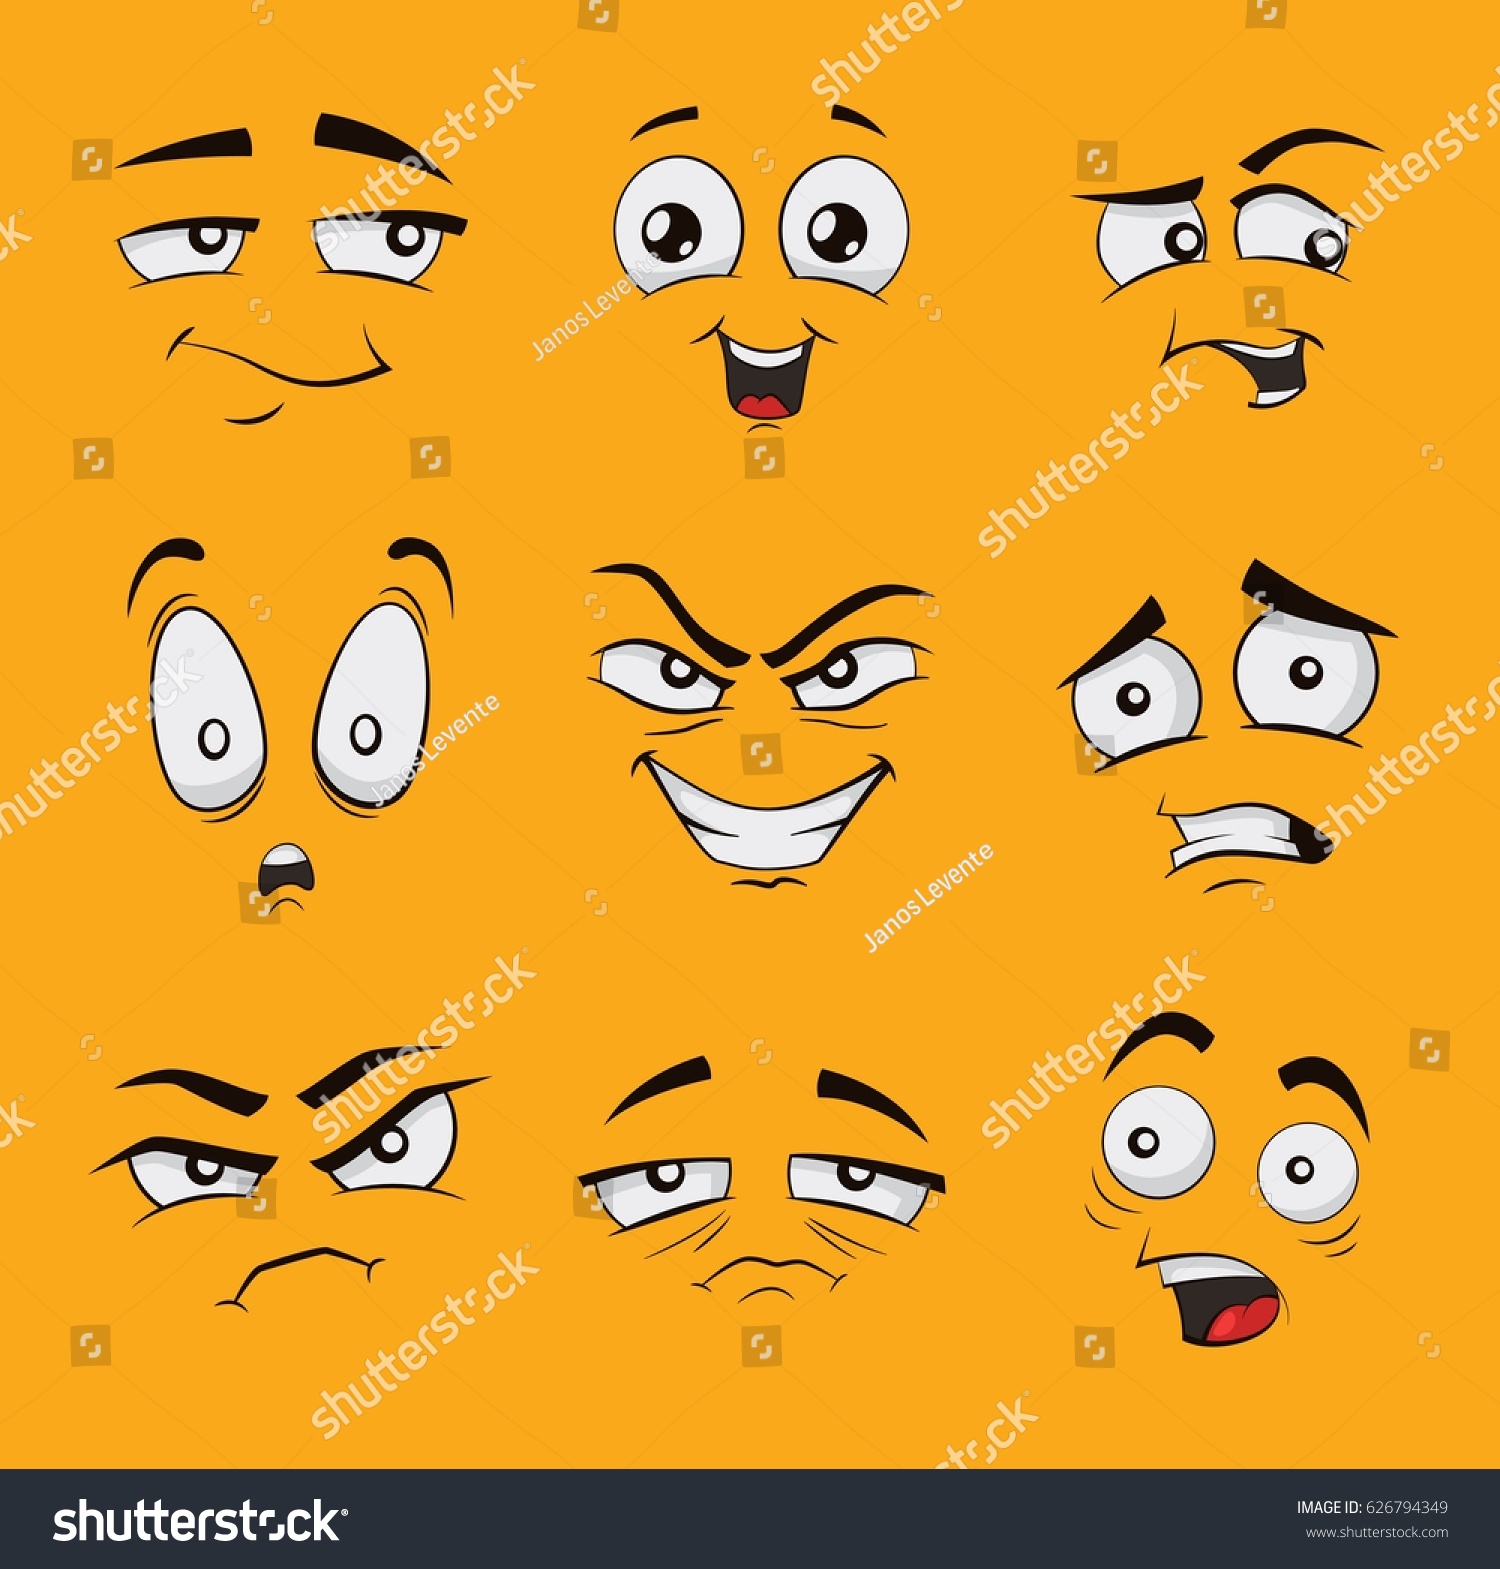 Set Funny Cartoon Faces Different Emotions Stock Vector 626794349 ...